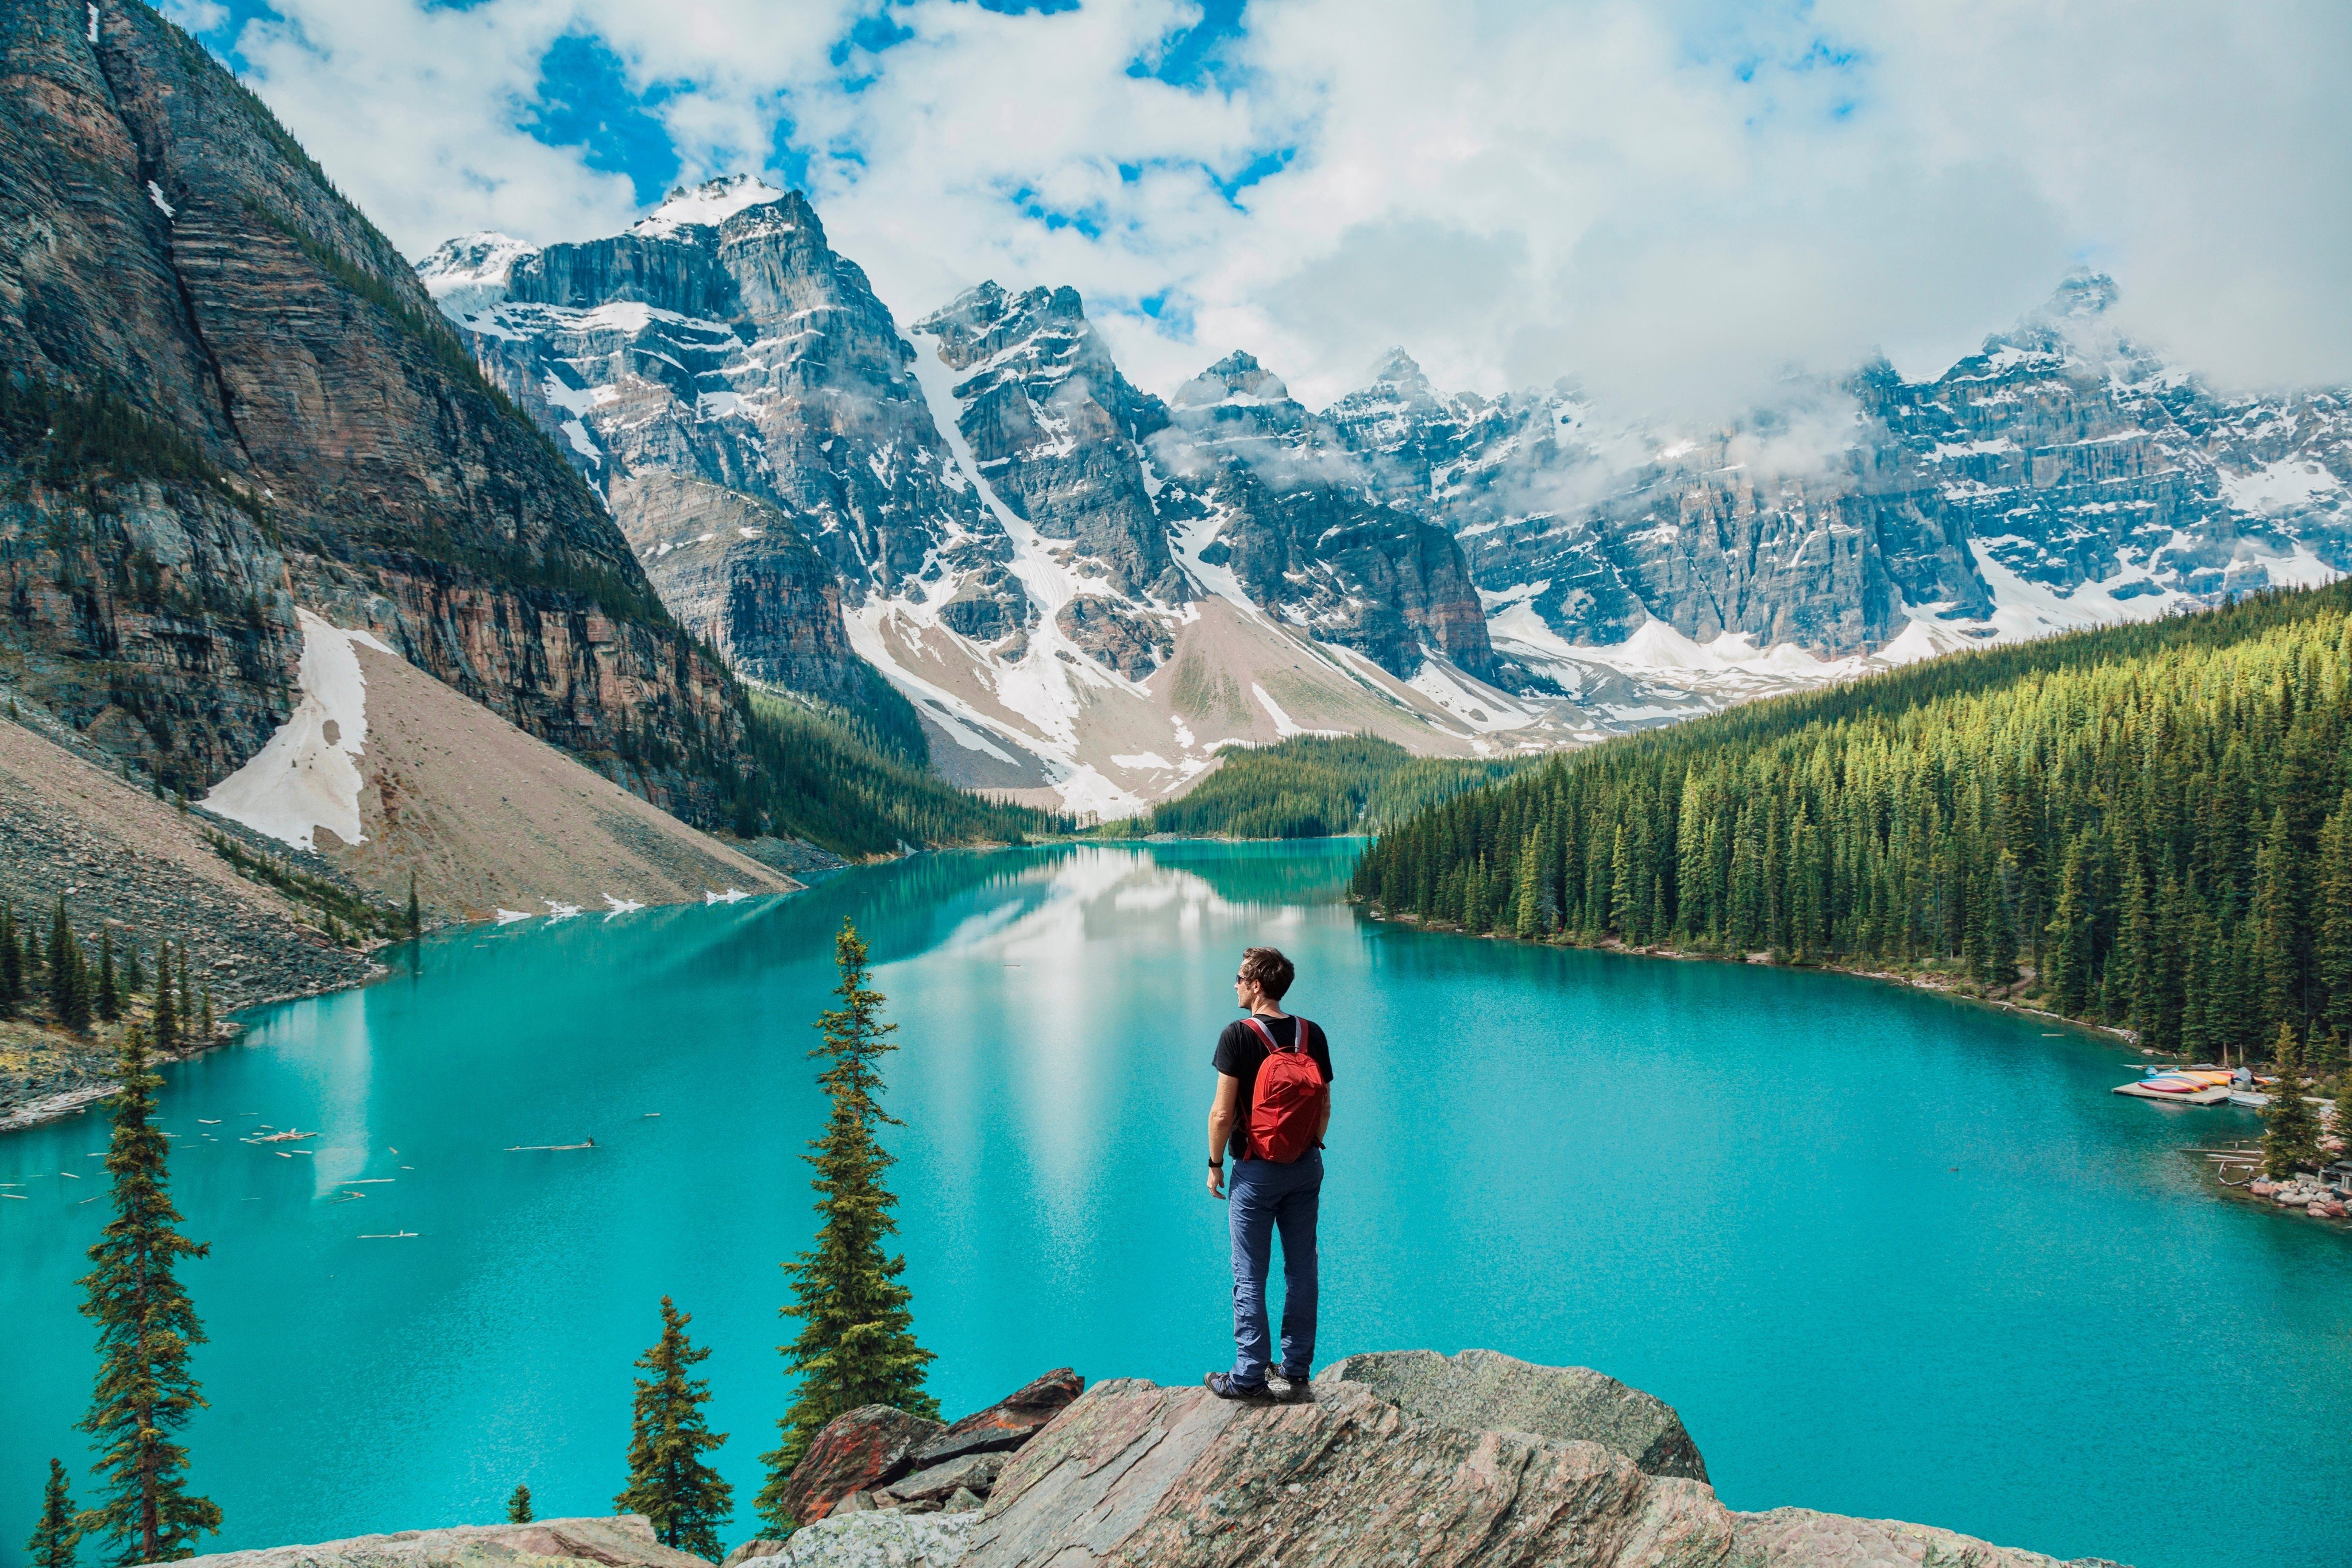 A tourist in Banff, Canada. Interest in “coolcations” – holidays in cooler places – is growing as climate breakdown pushes summer temperatures to record highs from Southeast Asia to Europe. Photo: Shutterstock